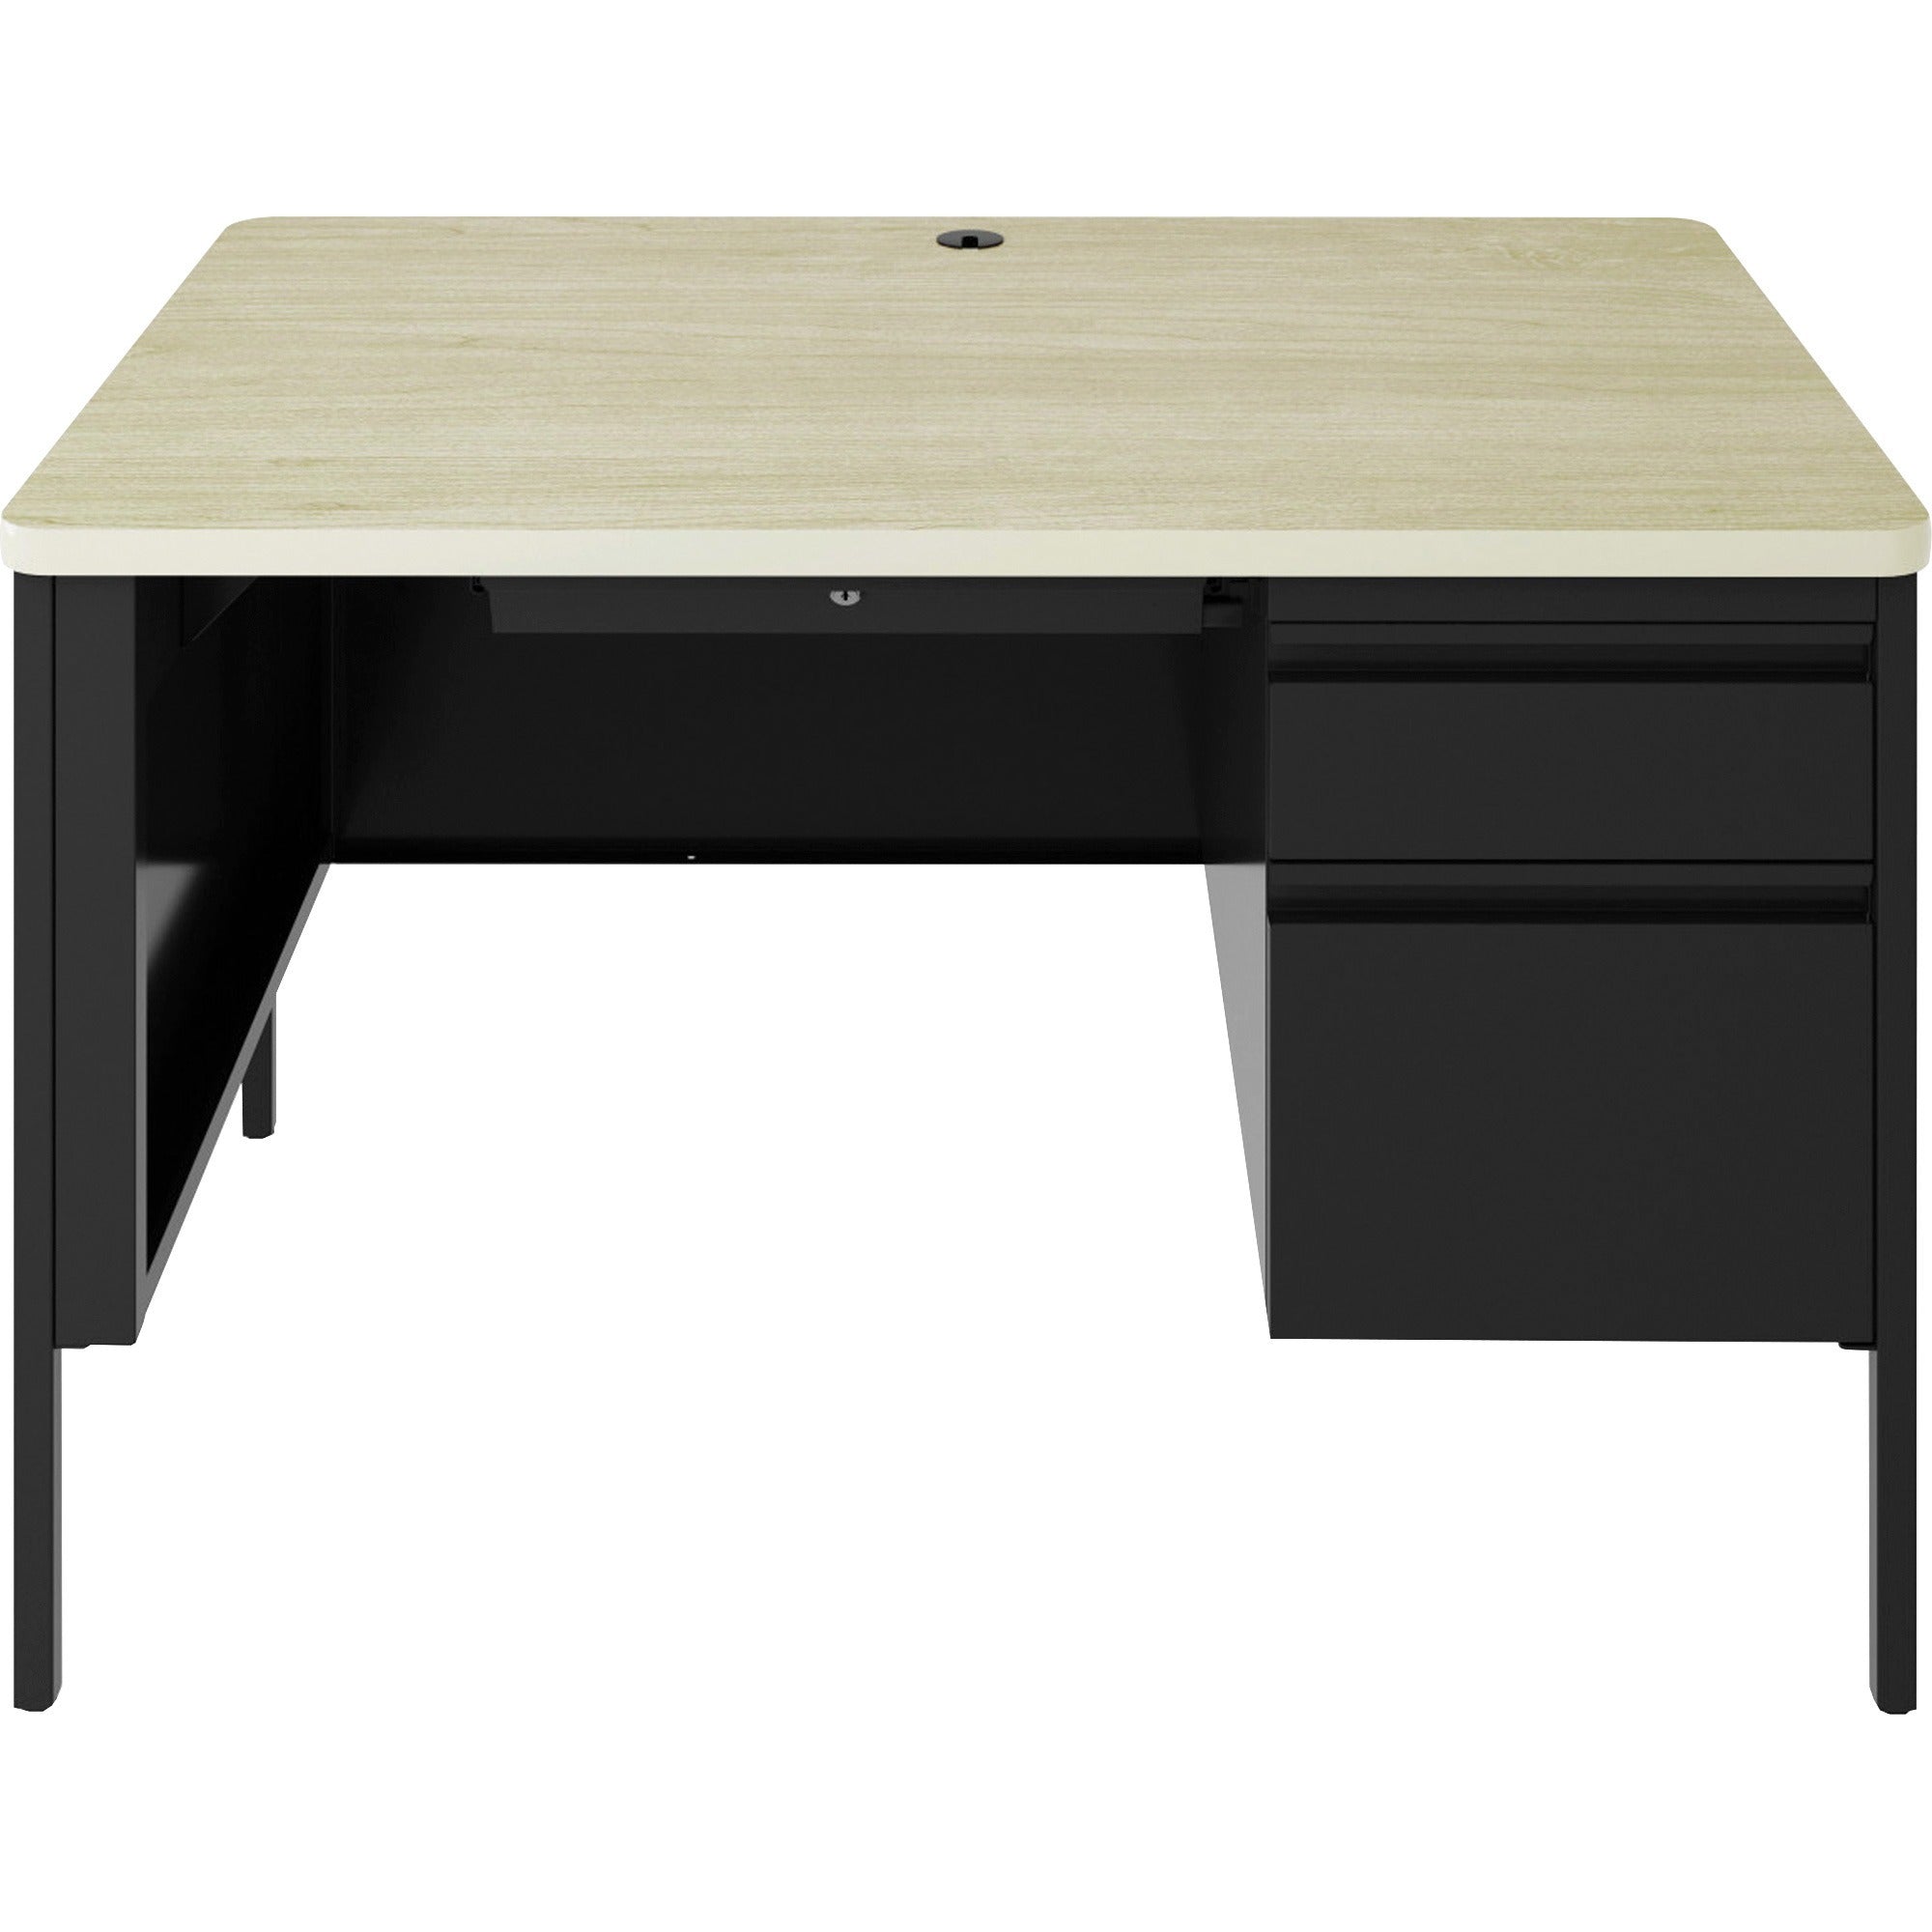 lorell-fortress-series-48-right-single-pedestal-desk-48-x-29530--08-modesty-panel-11-top-single-pedestal-on-right-side-square-edge-material-steel-finish-black_llr66907 - 3